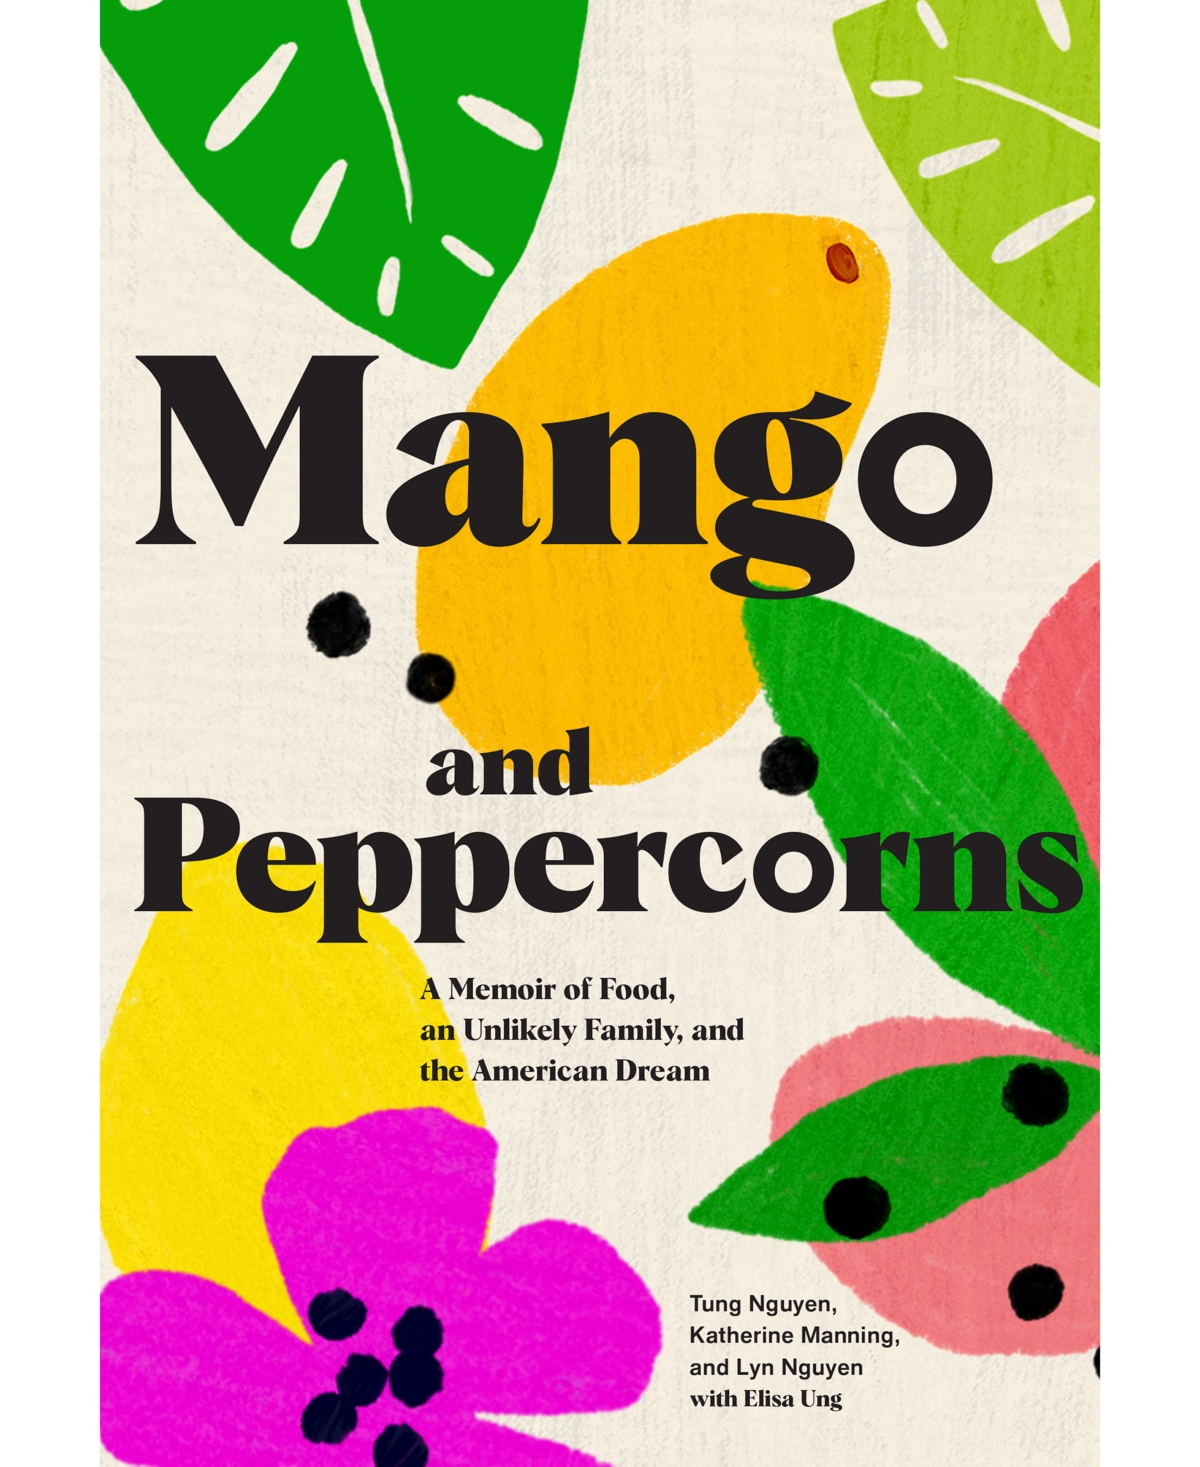 ISBN 9781797202242 product image for Chronicle Books Mango and Peppercorns | upcitemdb.com